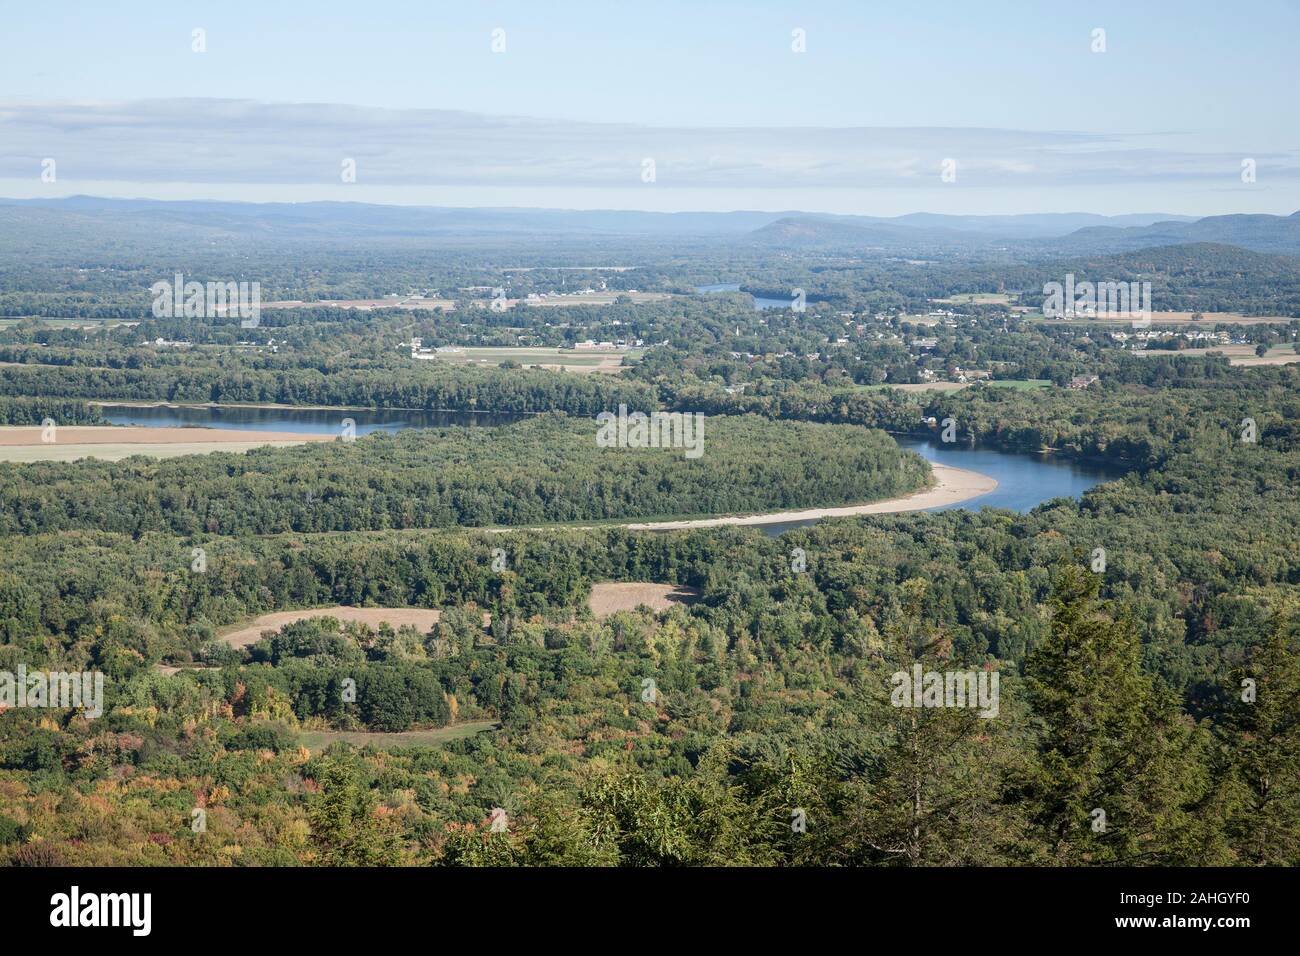 Panoramic view of Northampton, Connecticut River, and Pioneer Valley in autumn. Stock Photo